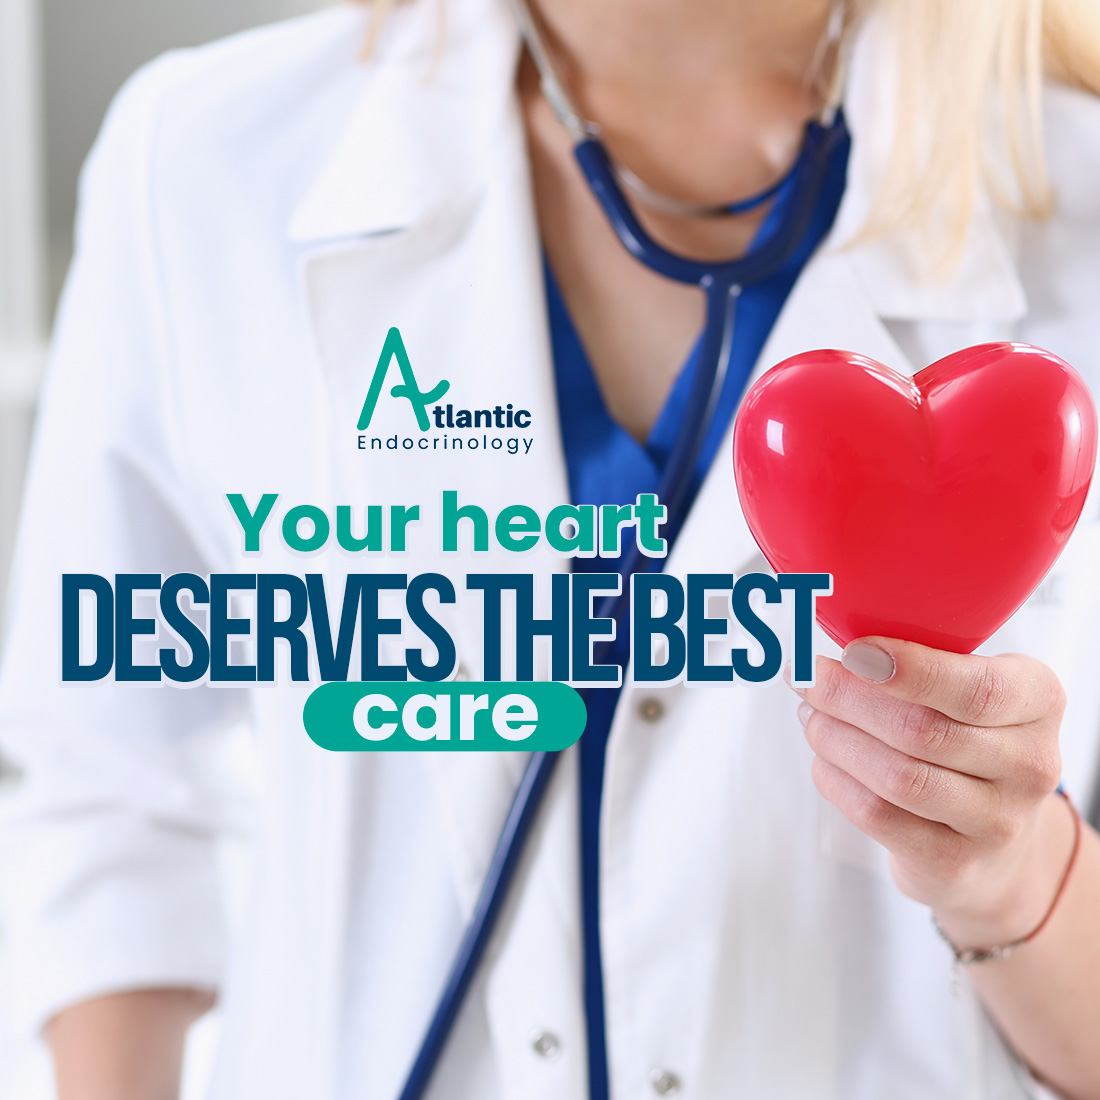 At  Atlantic Endocrinology, we provide top-notch cardiac care tailored to your needs. Don't wait—prioritize your heart health today! 🩺✨ Schedule your appointment now and take the first step towards a healthier heart. 💪 

#HeartHealth #Cardiology #TopCare #HealthyHeart